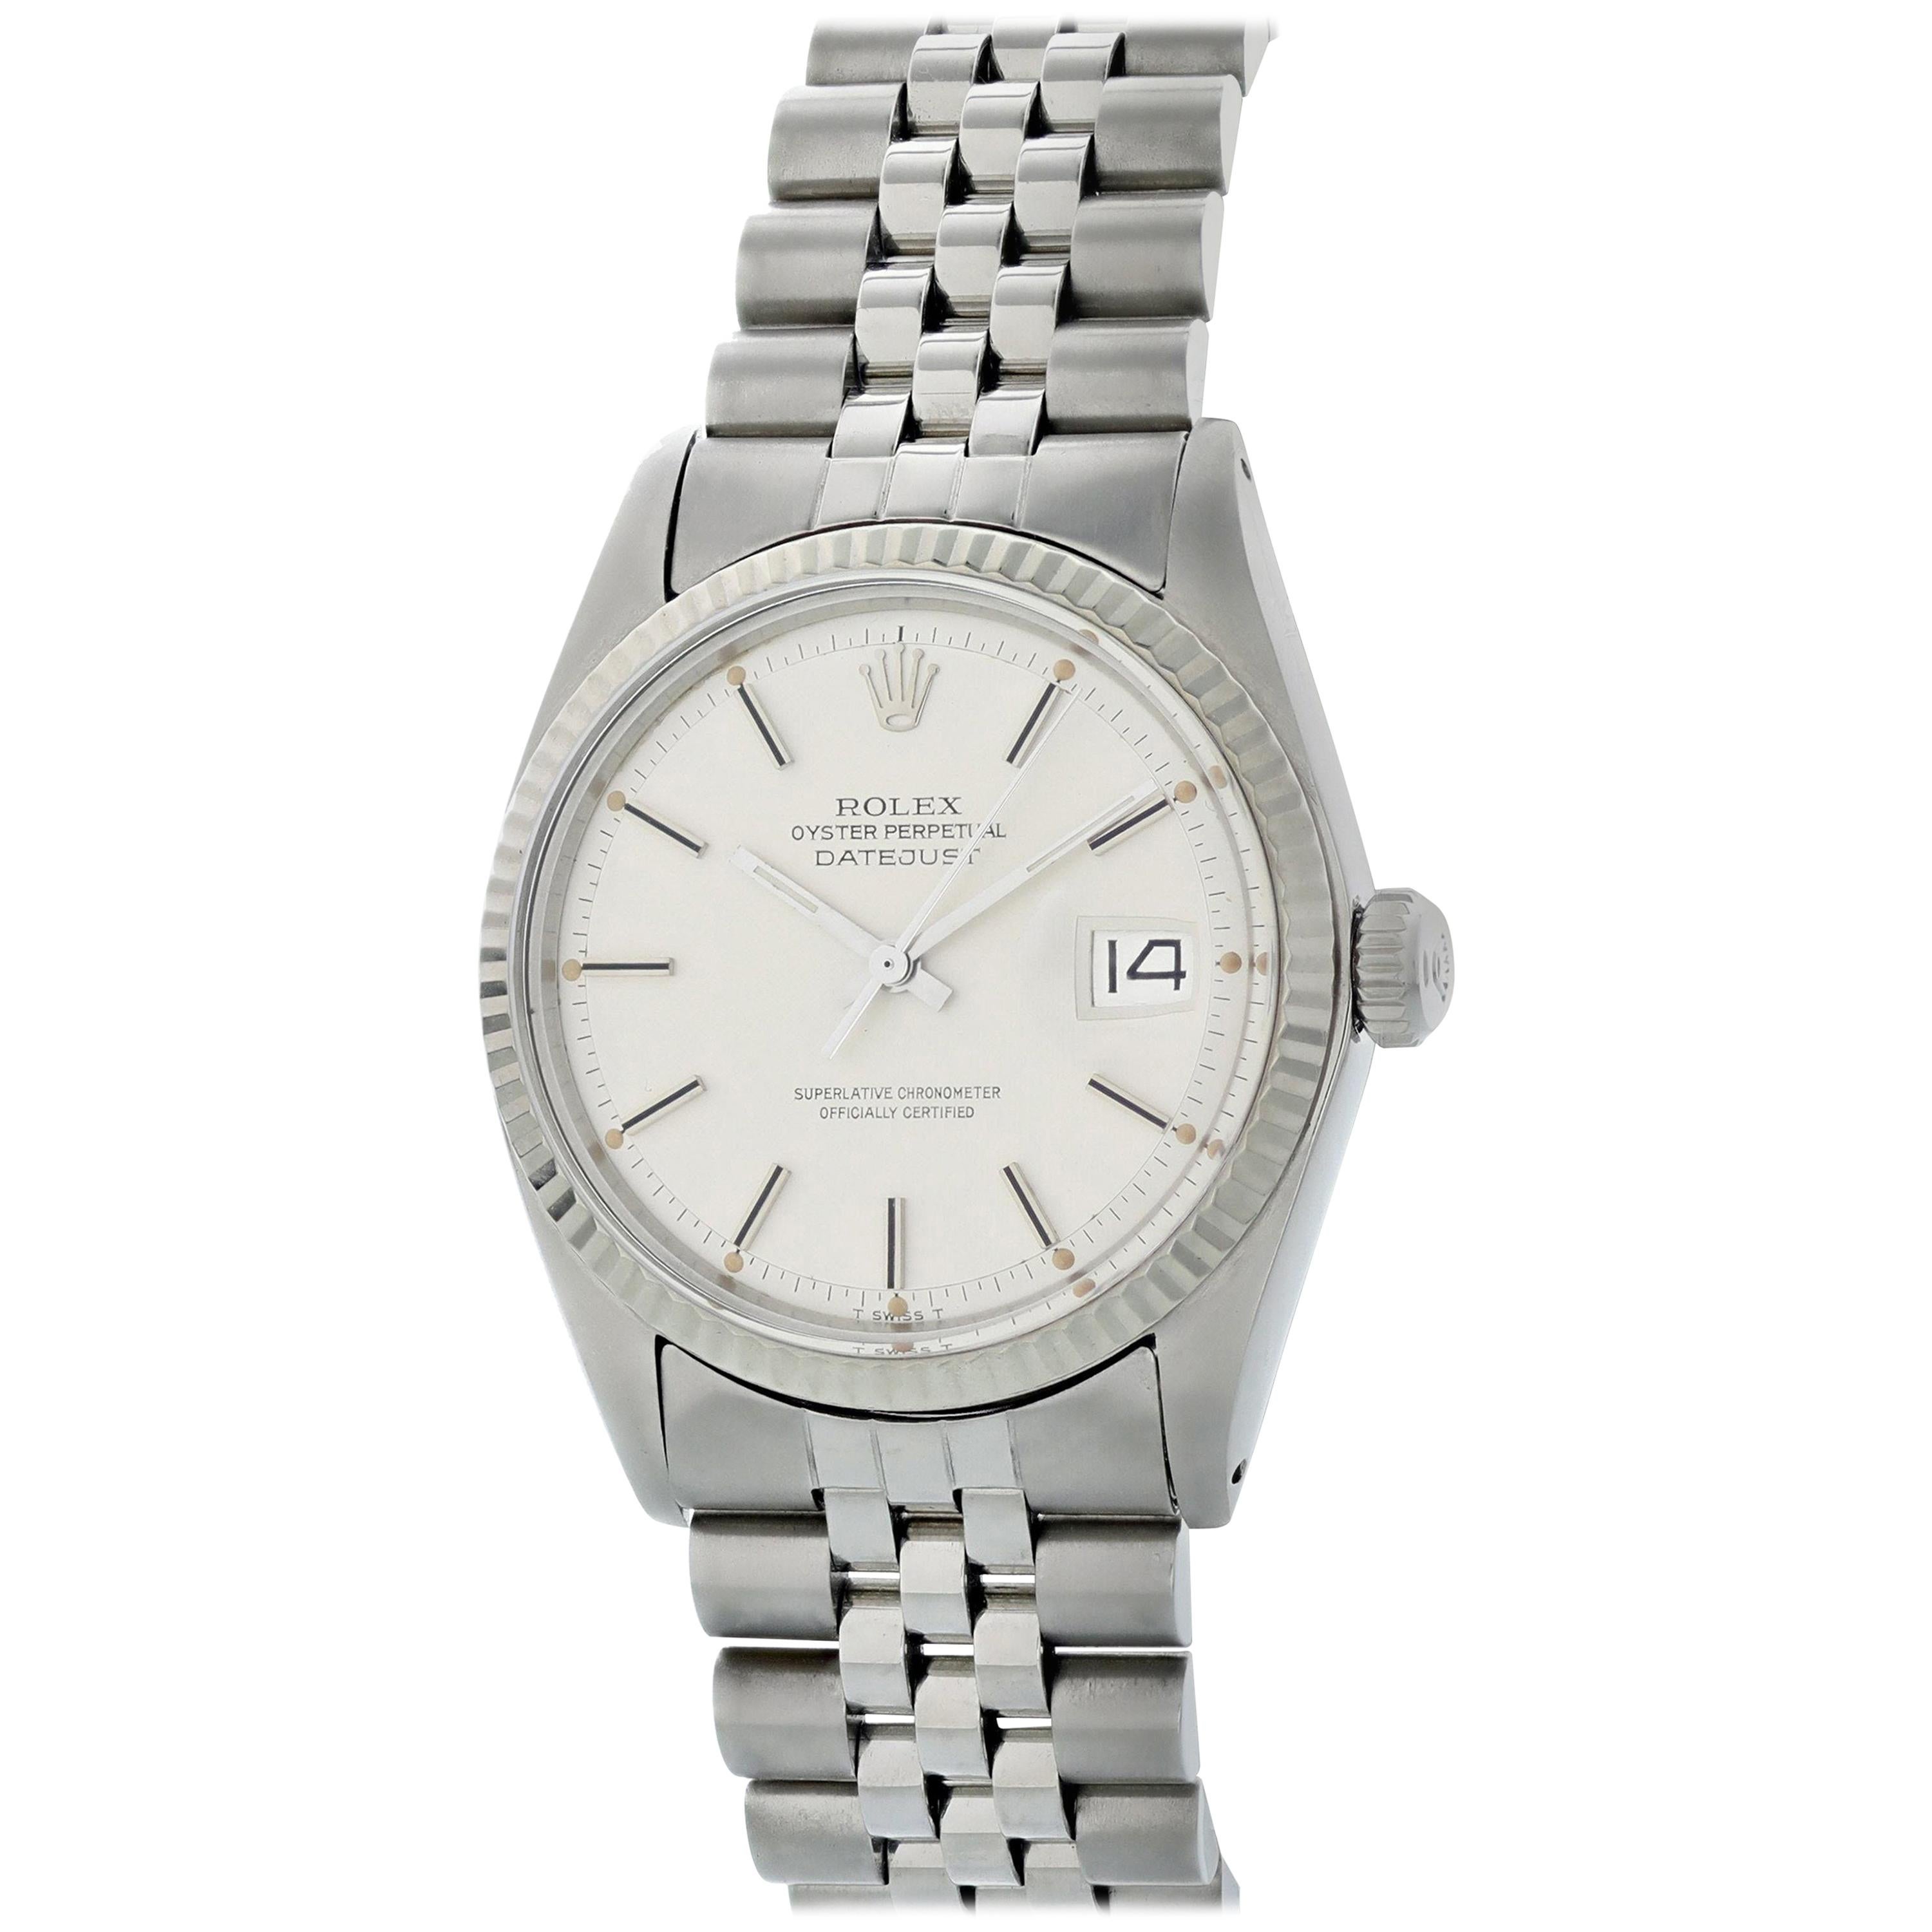 Rolex Oyster Perpetual Datejust 1601 Men's Watch For Sale